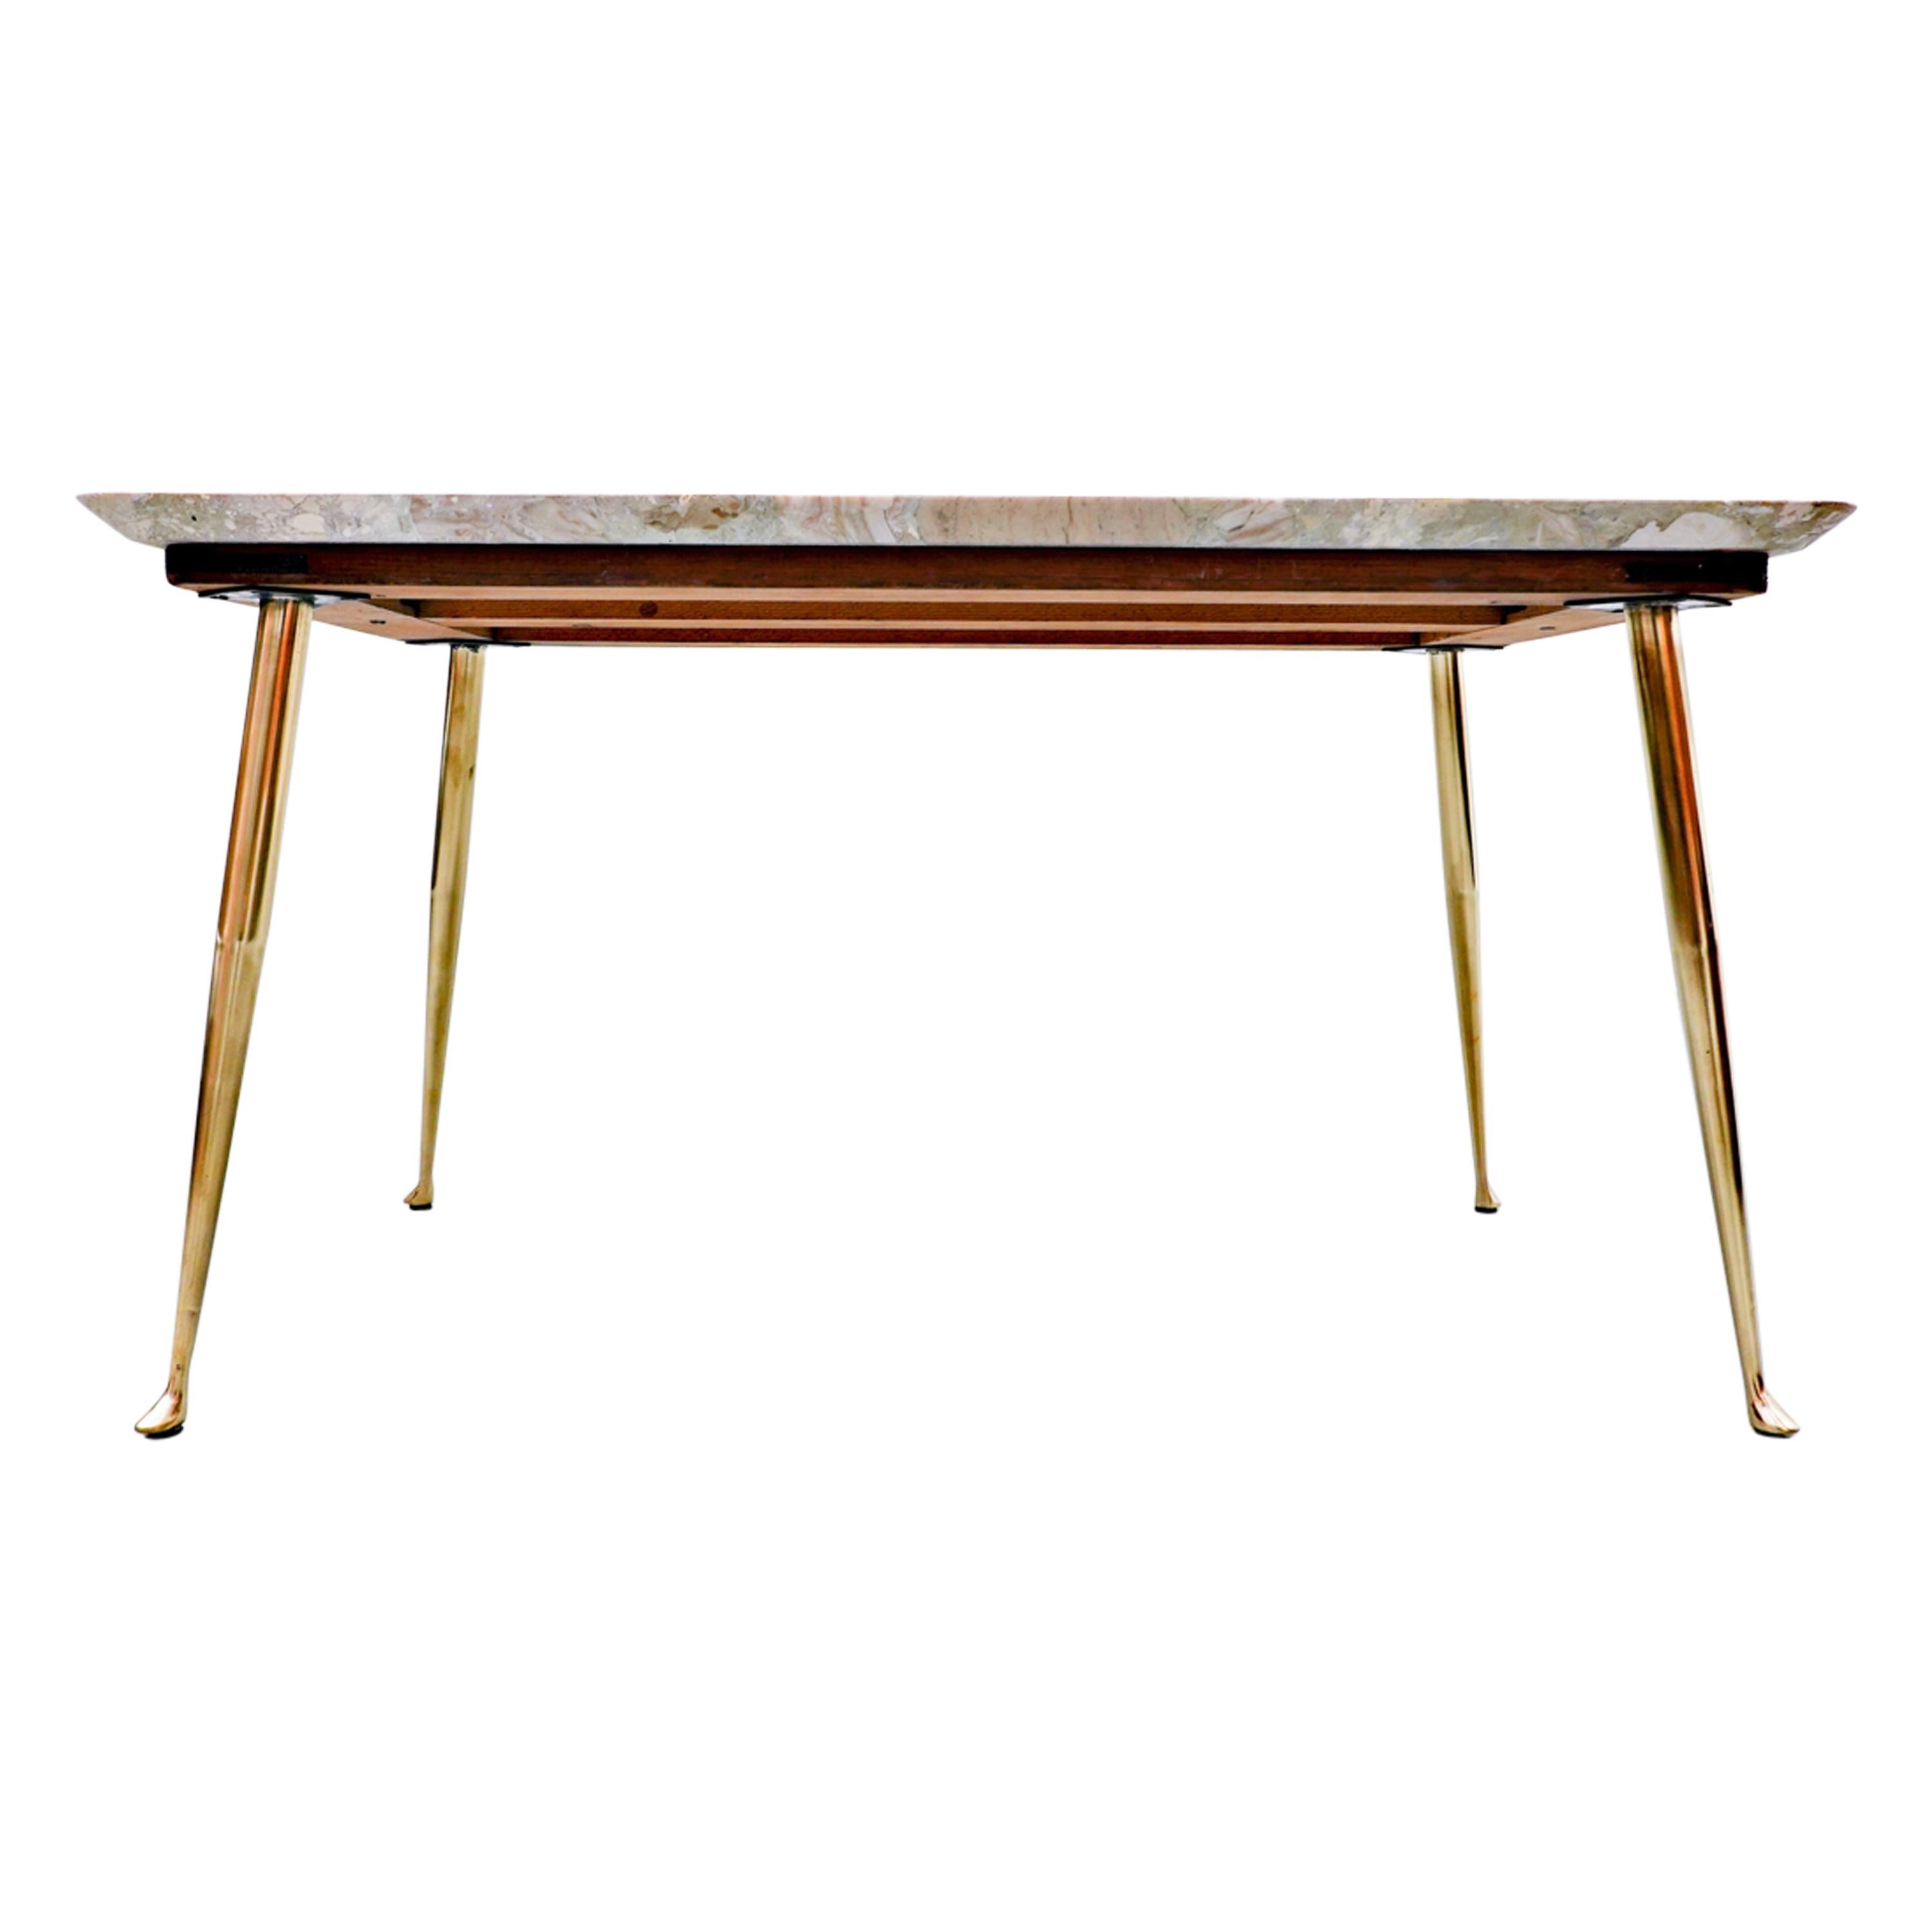 Mid-Century Modern Italian Side Table, Mable and Brass, 1960s For Sale